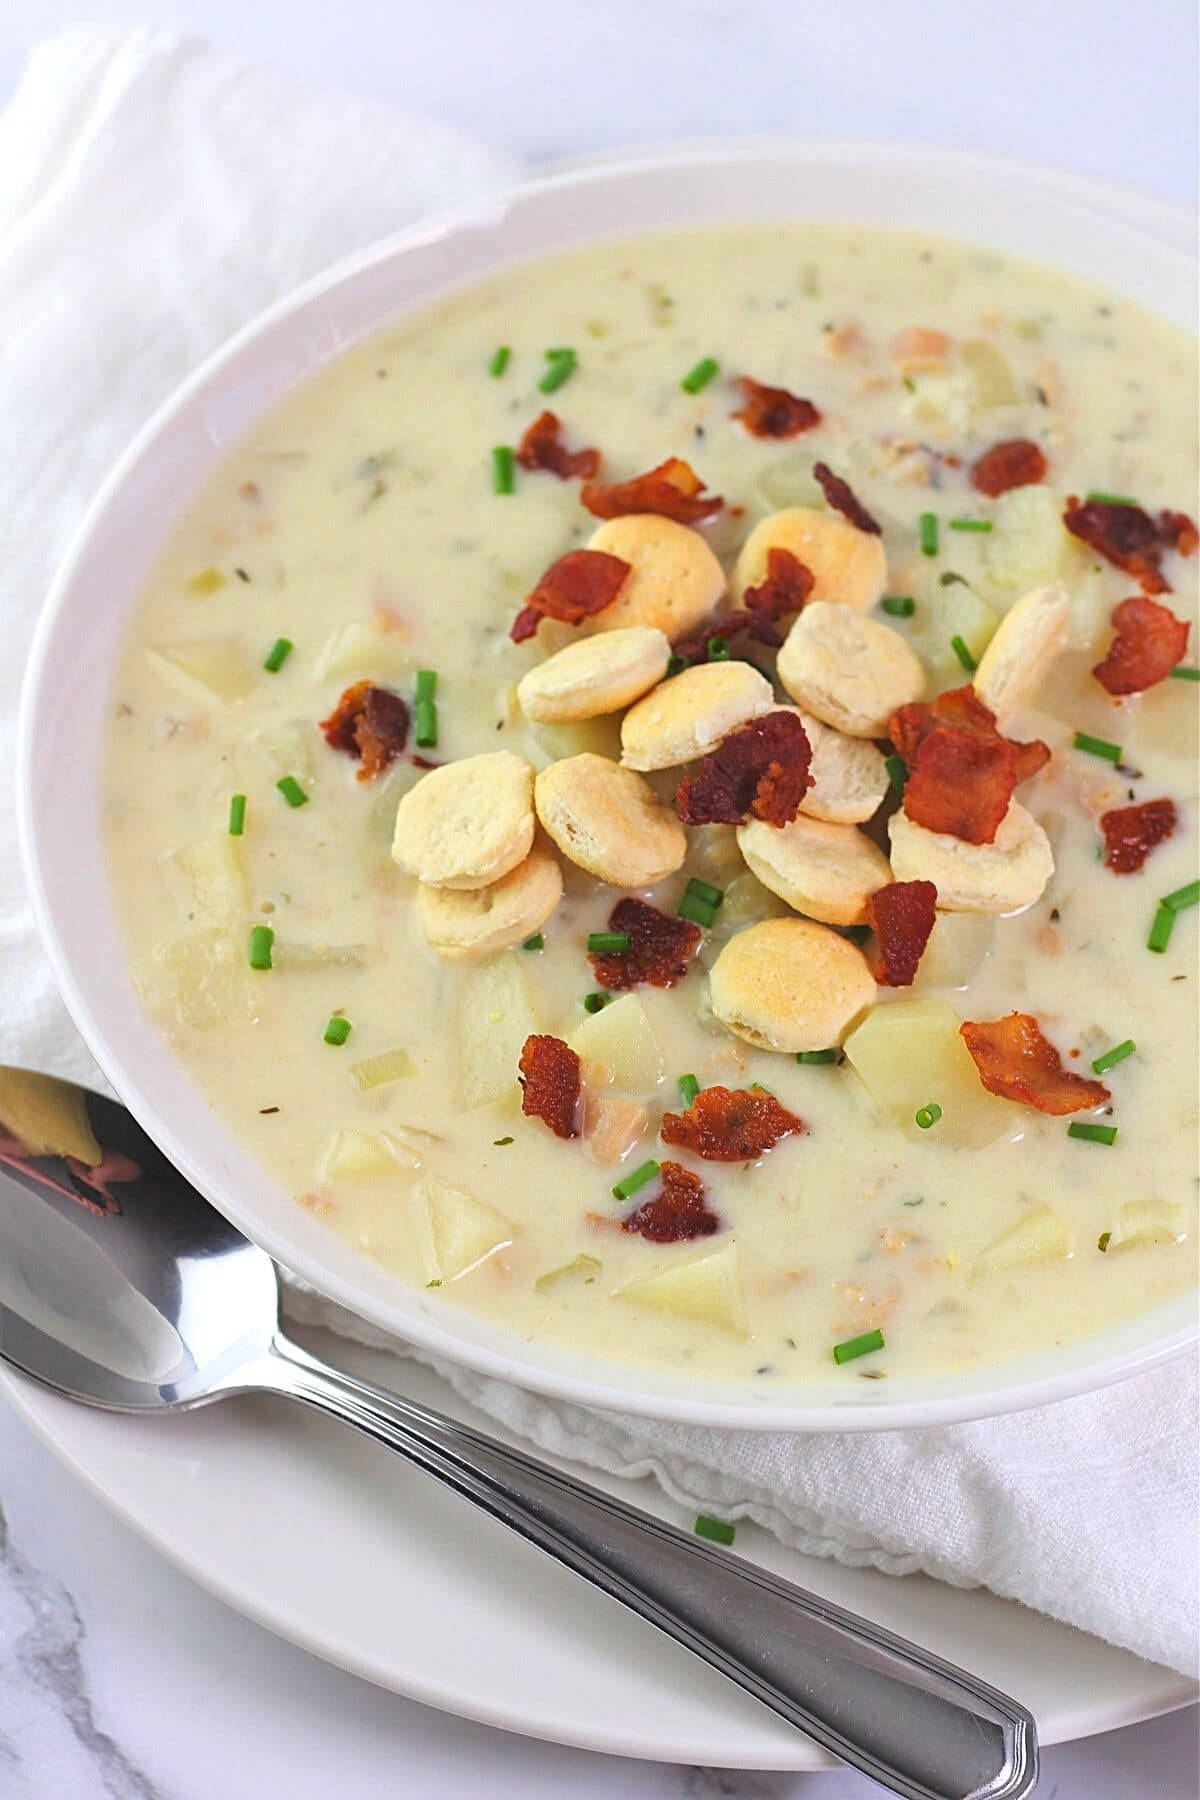 Leckerenew England Clam Chowder Suppe Wallpaper